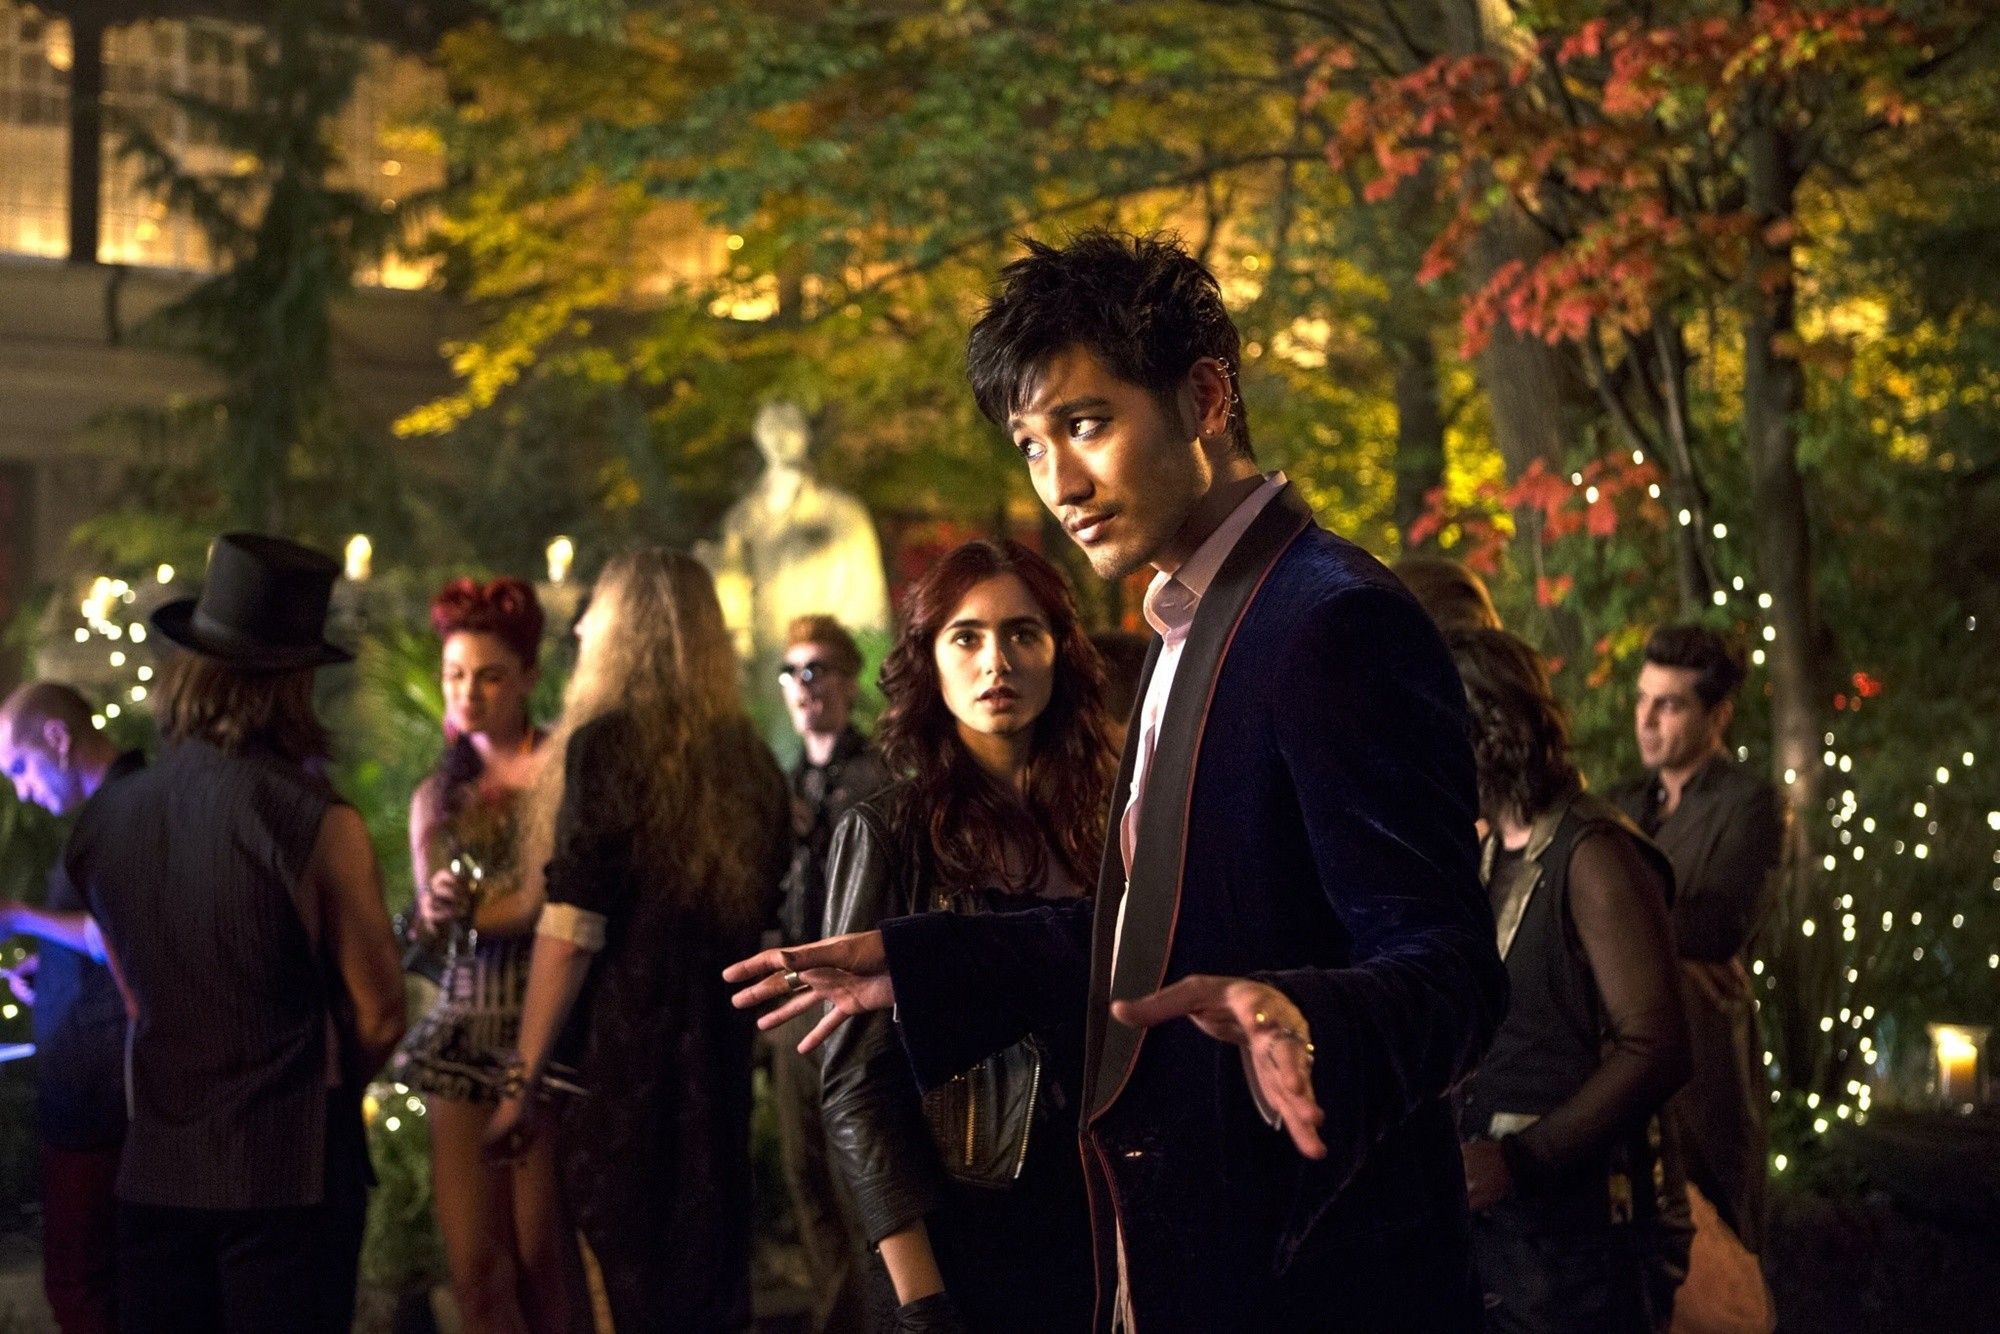 Lily Collins stars as Clary Fray and Godfrey Gao stars as Magnus Bane in Screen Gems' The Mortal Instruments: City of Bones (2013). Photo credit by Rafy.